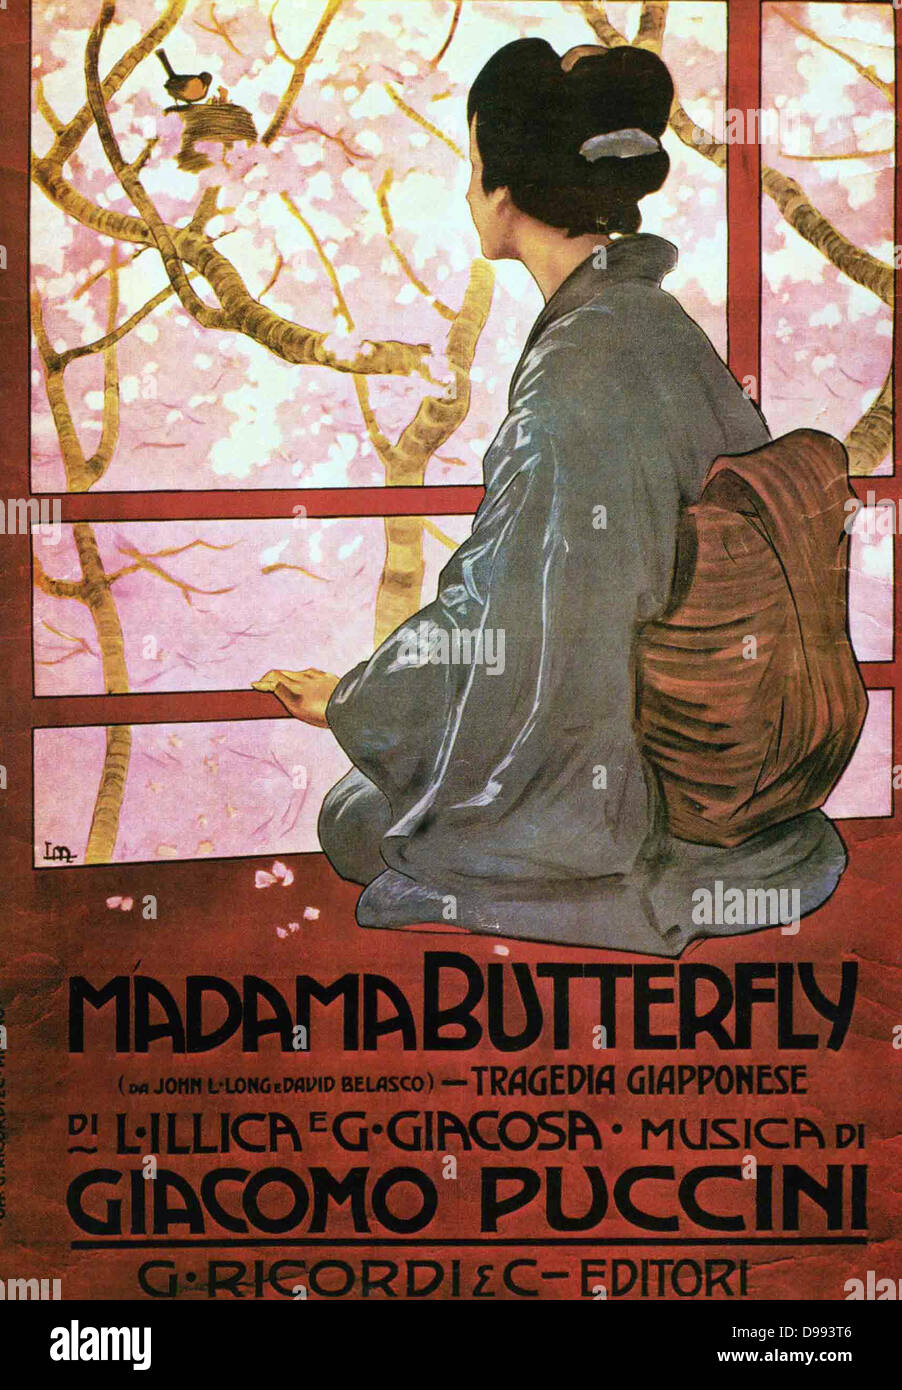 Giacomo Puccini (1858 –1924) Italian composer of operas. Poster for Madama Butterfly (Madame Butterfly) an opera in three acts, with an Italian libretto by Luigi Illica and Giuseppe Giacosa. Stock Photo